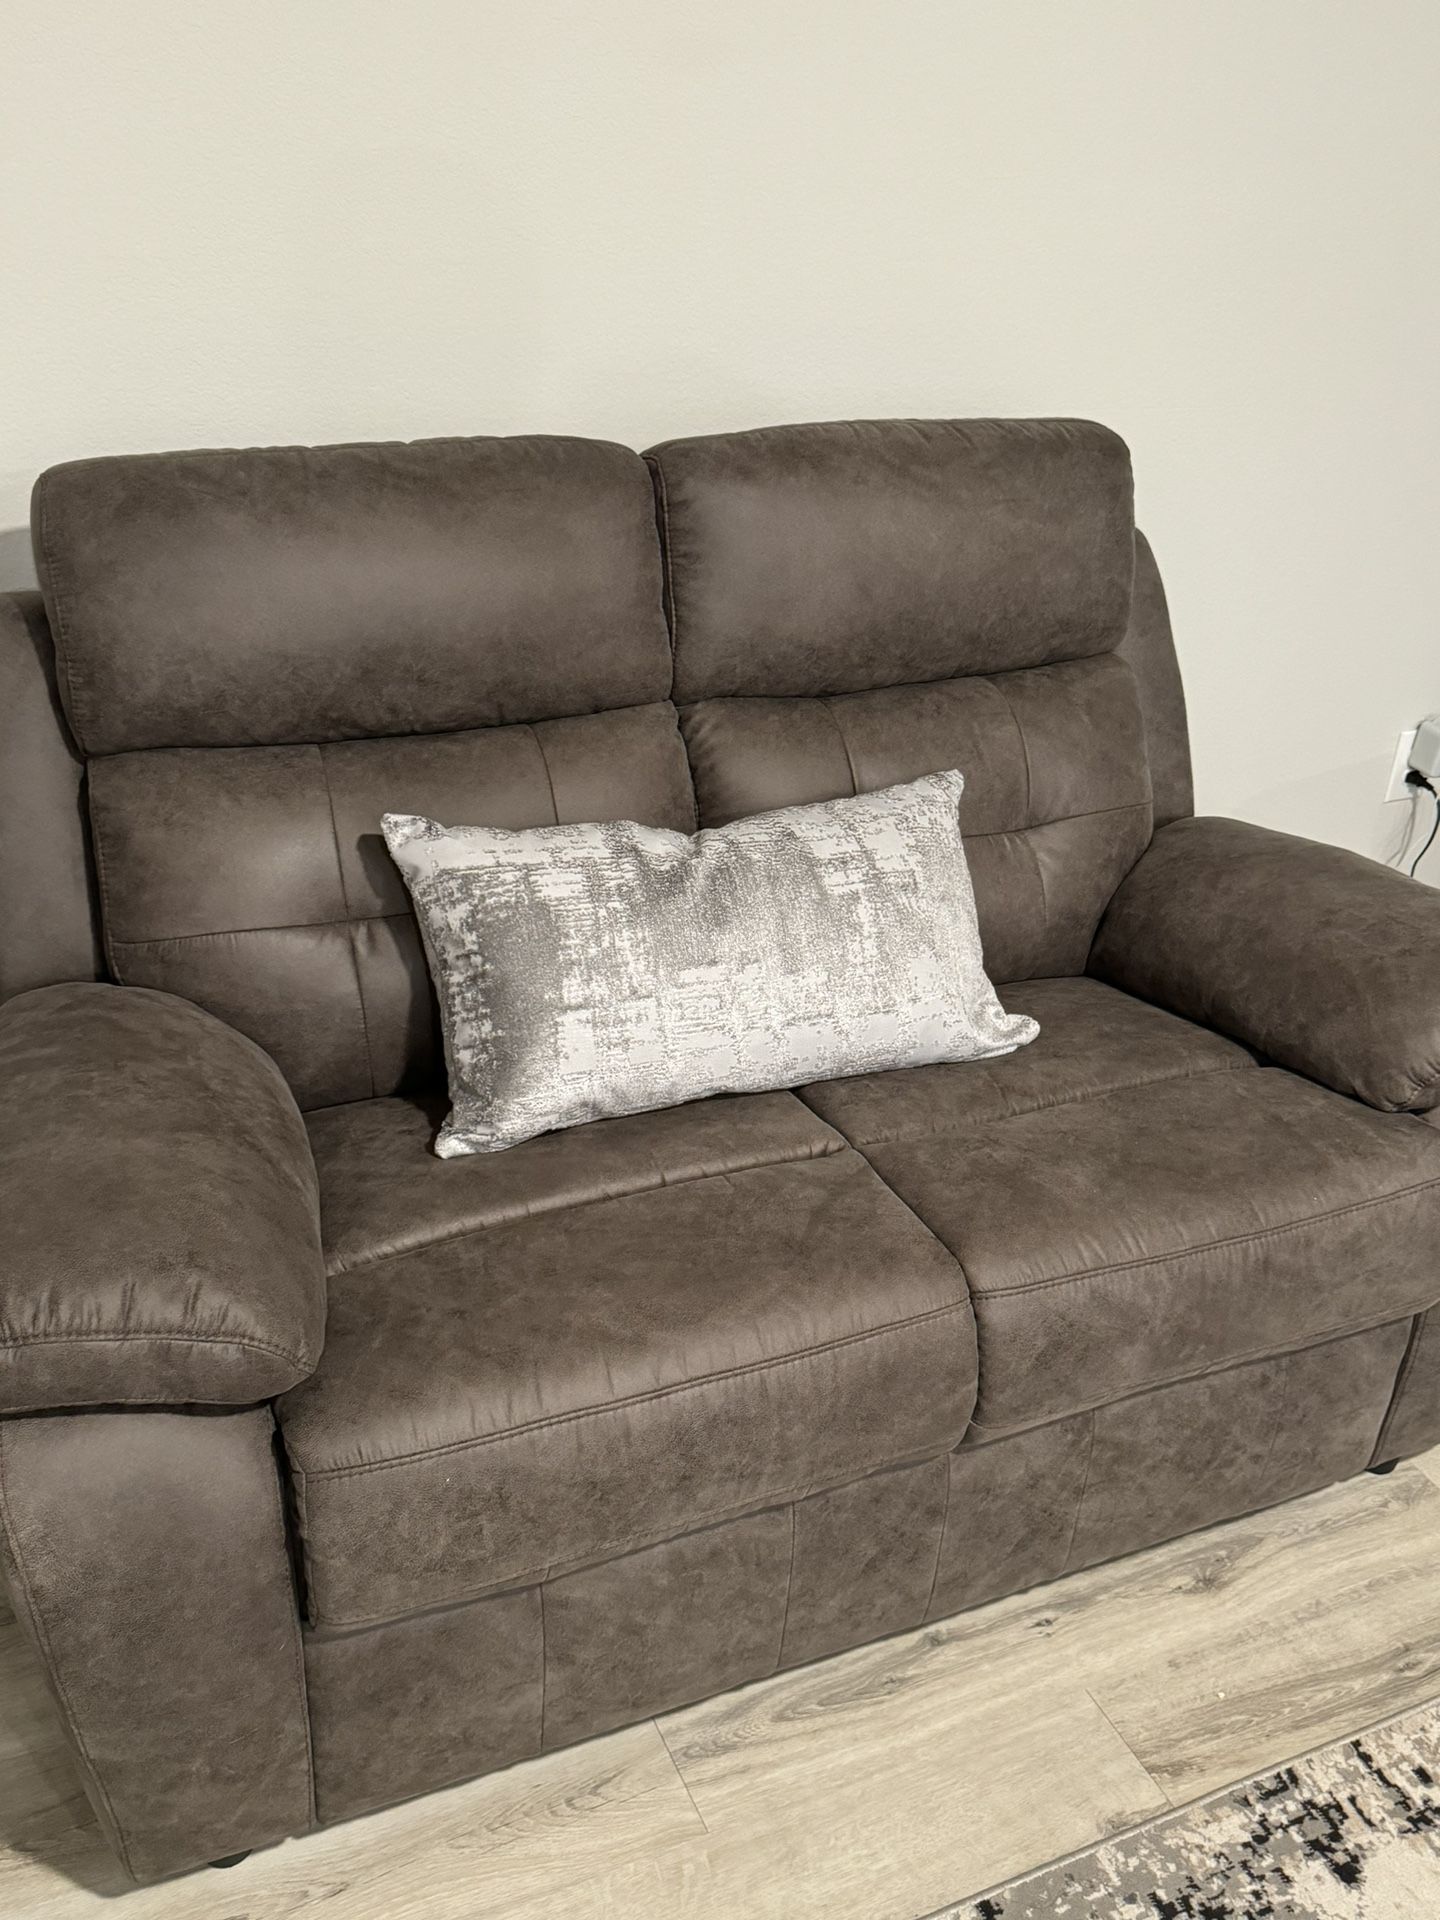 BRAND NEW RECLINER COUCH SET! 